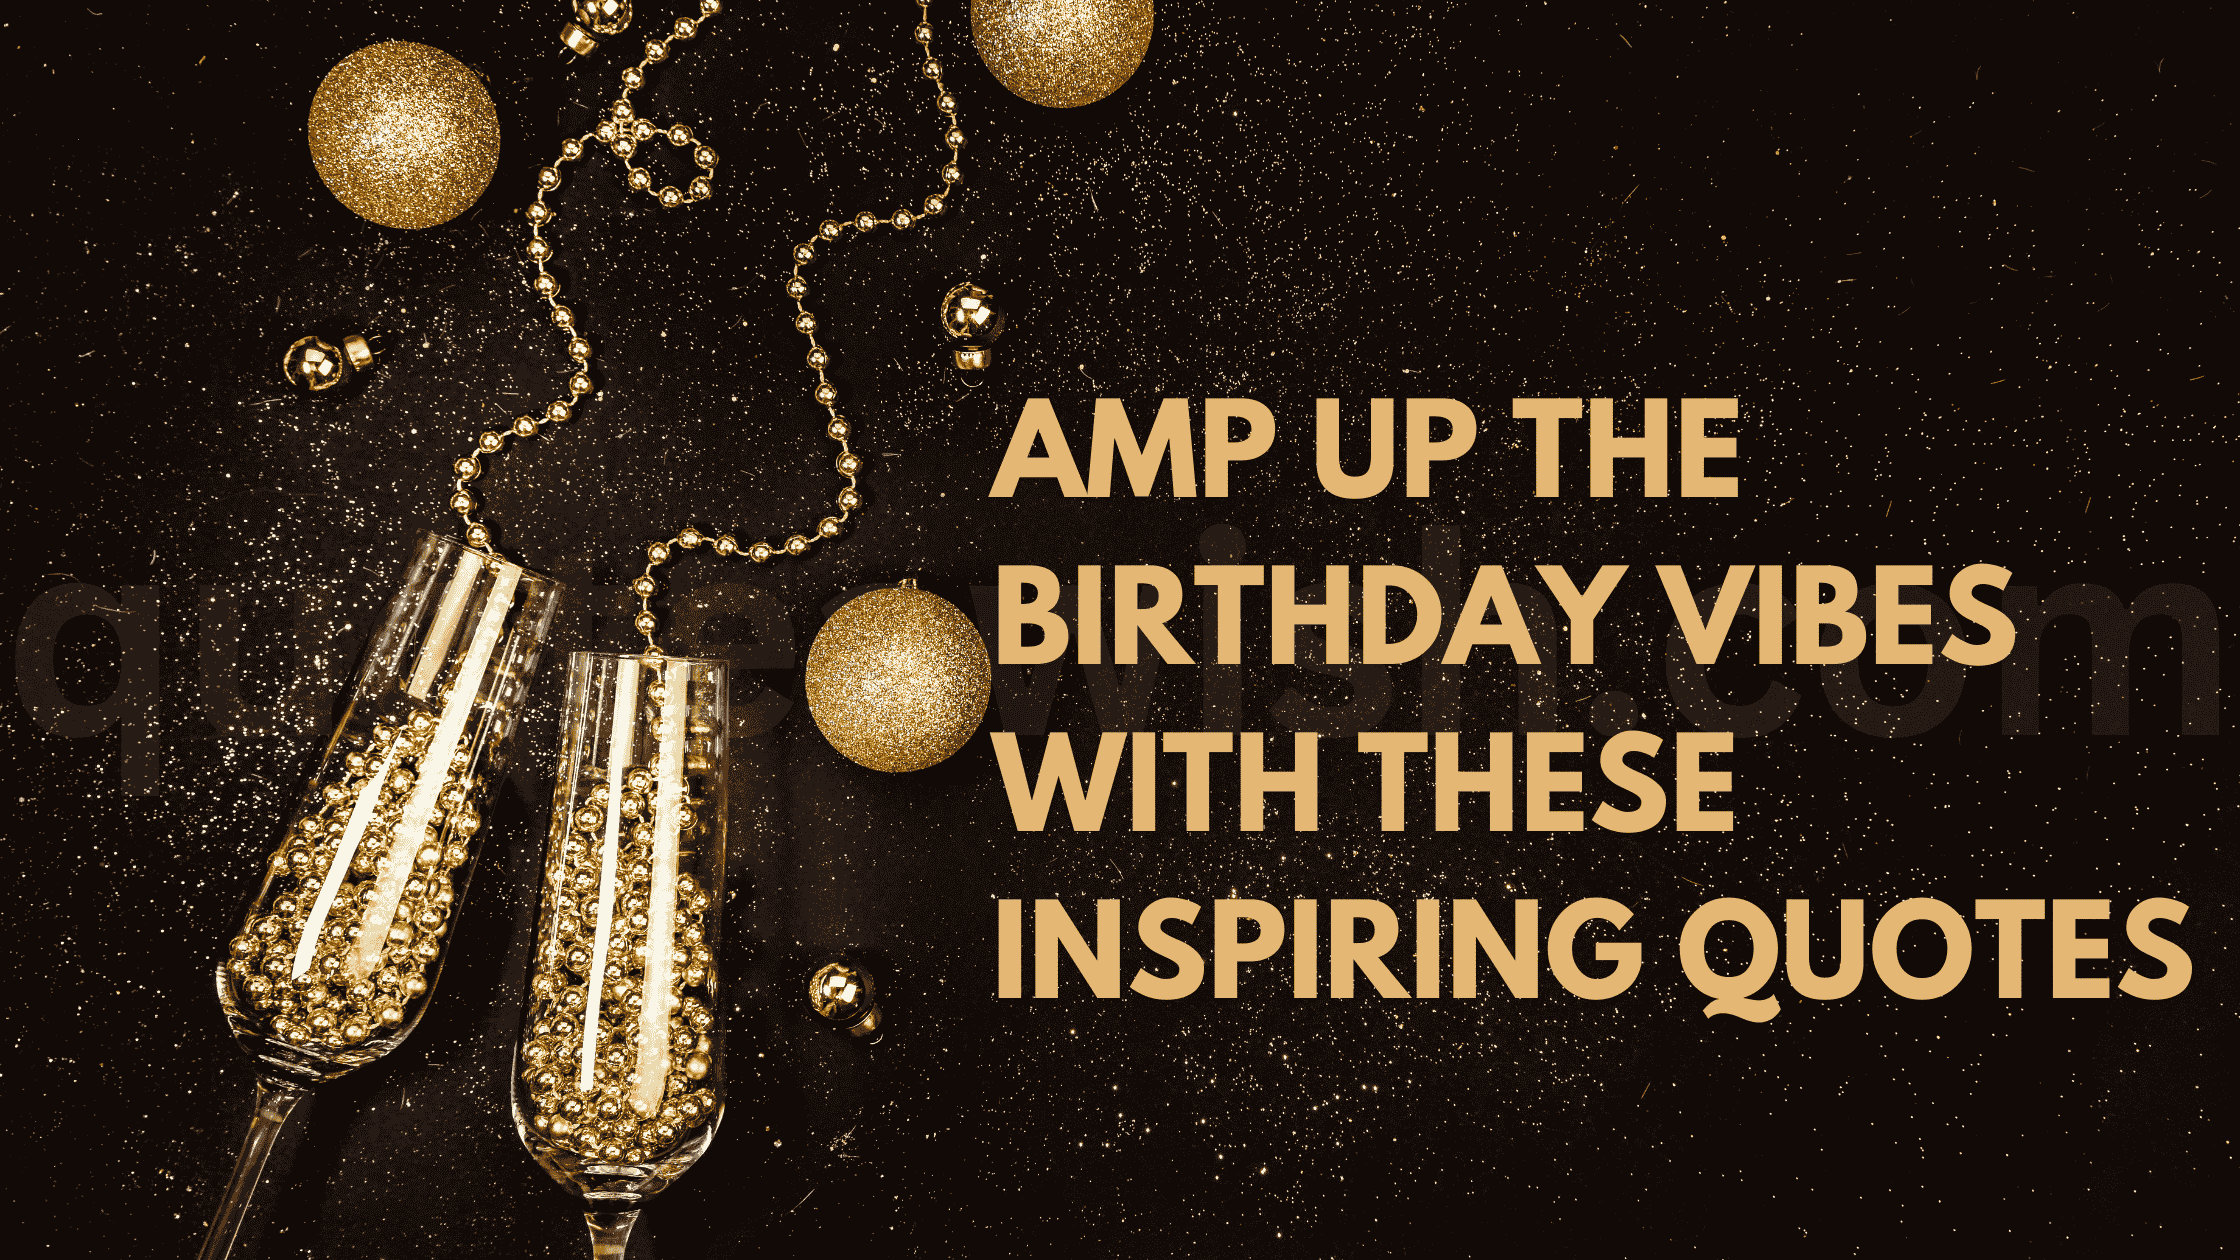 Amp up the Birthday Vibes With These Inspiring Quotes